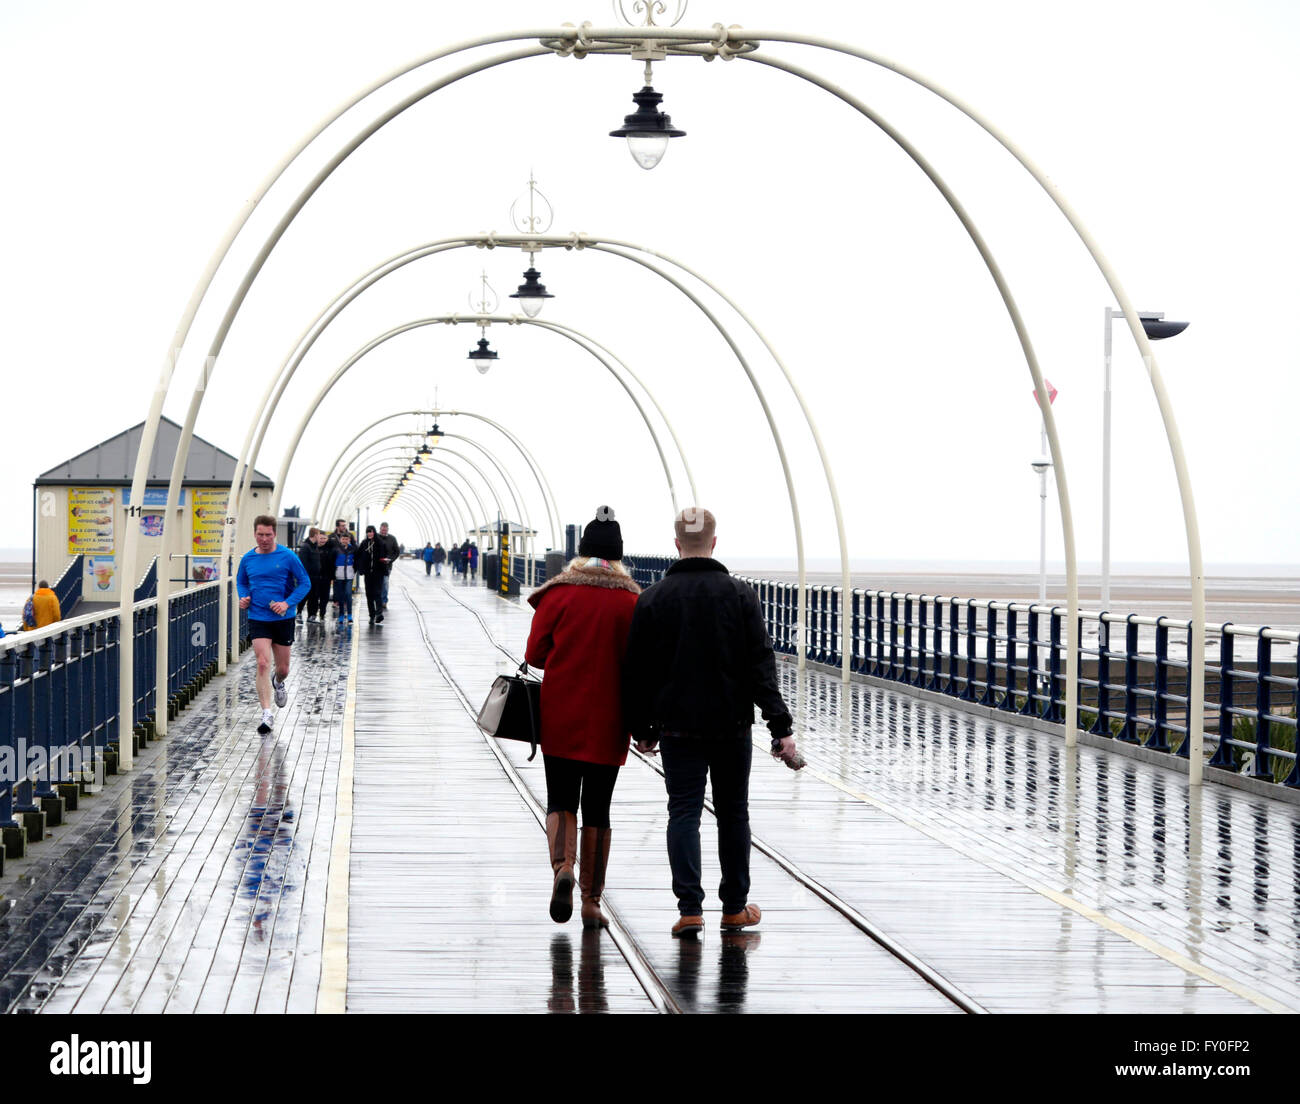 Weather Southport Merseyside UK. 2 April 2016. People out and about on a rainy Saturday in Southport Merseyside UK Stock Photo